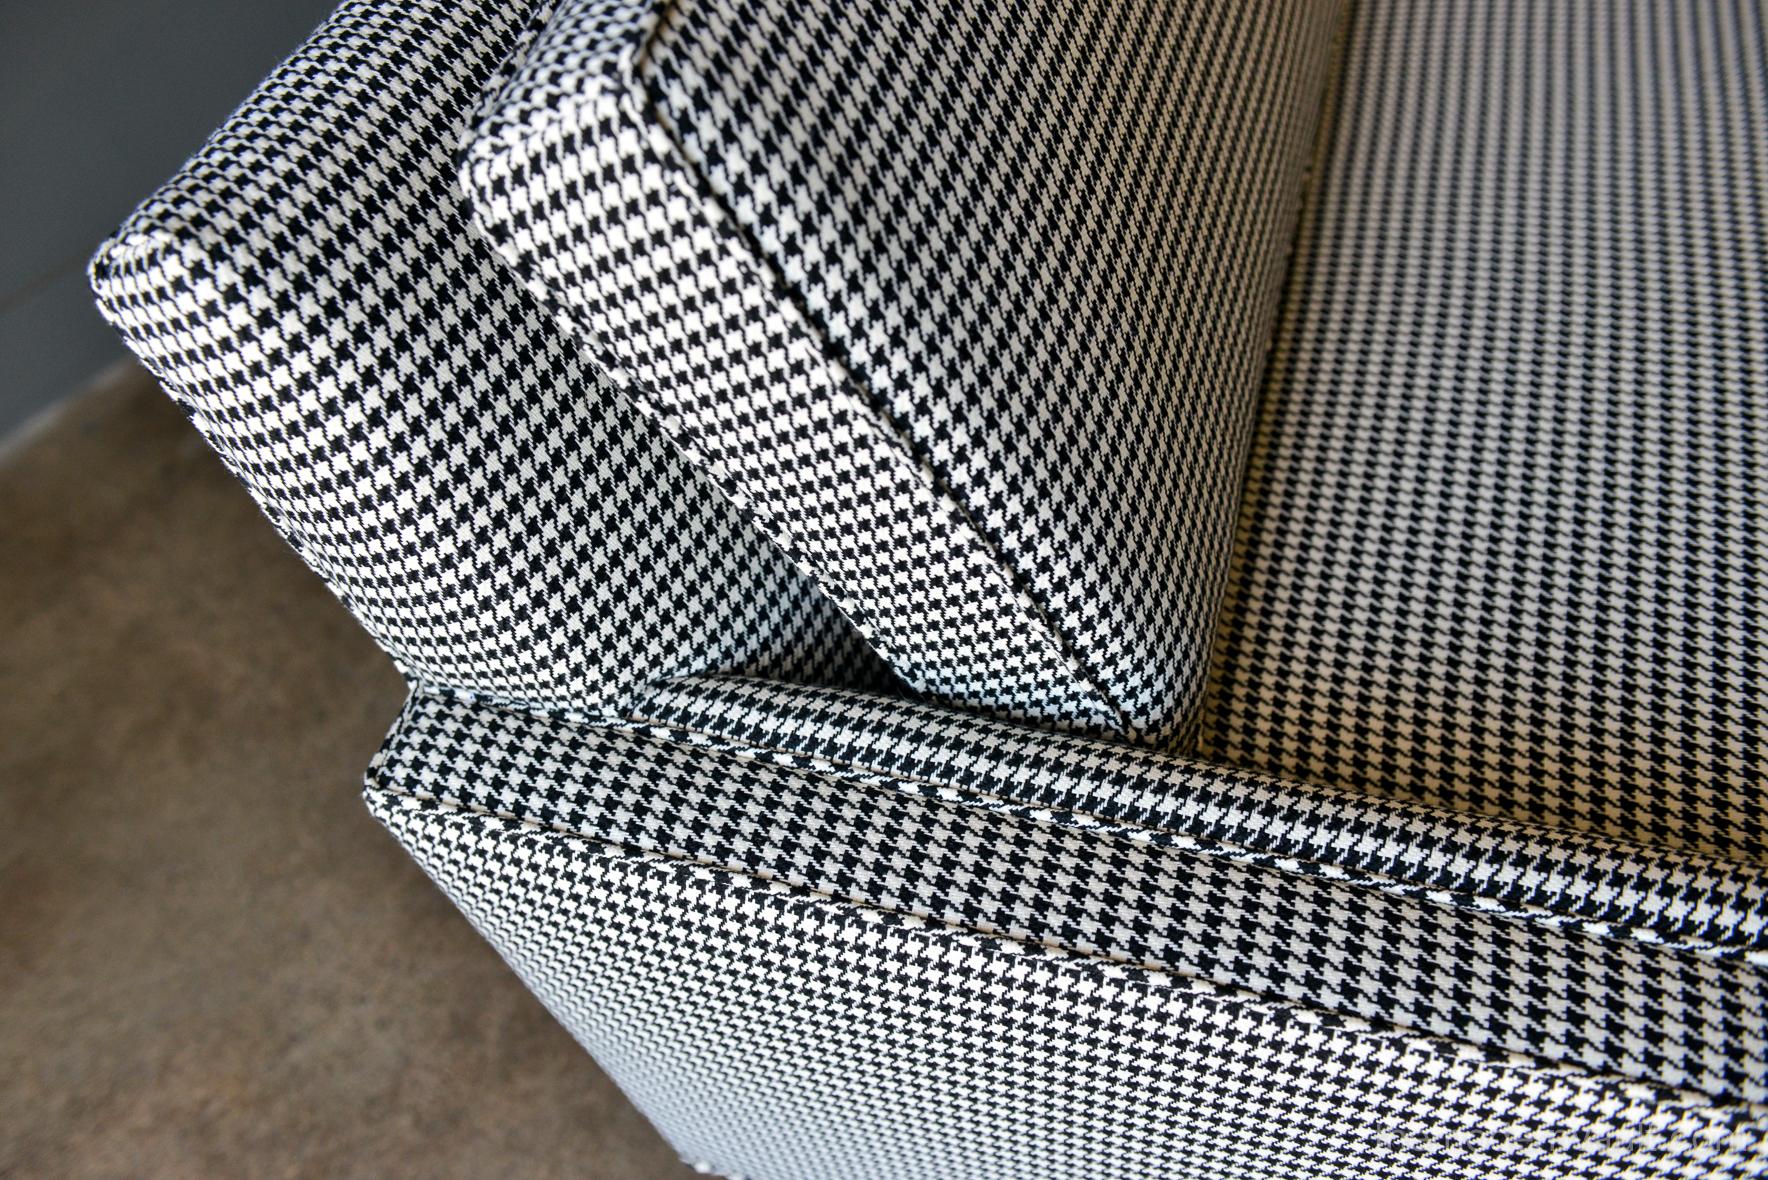 Fabric Mid-Century Modern Sofa in Black and White Houndstooth, circa 1955